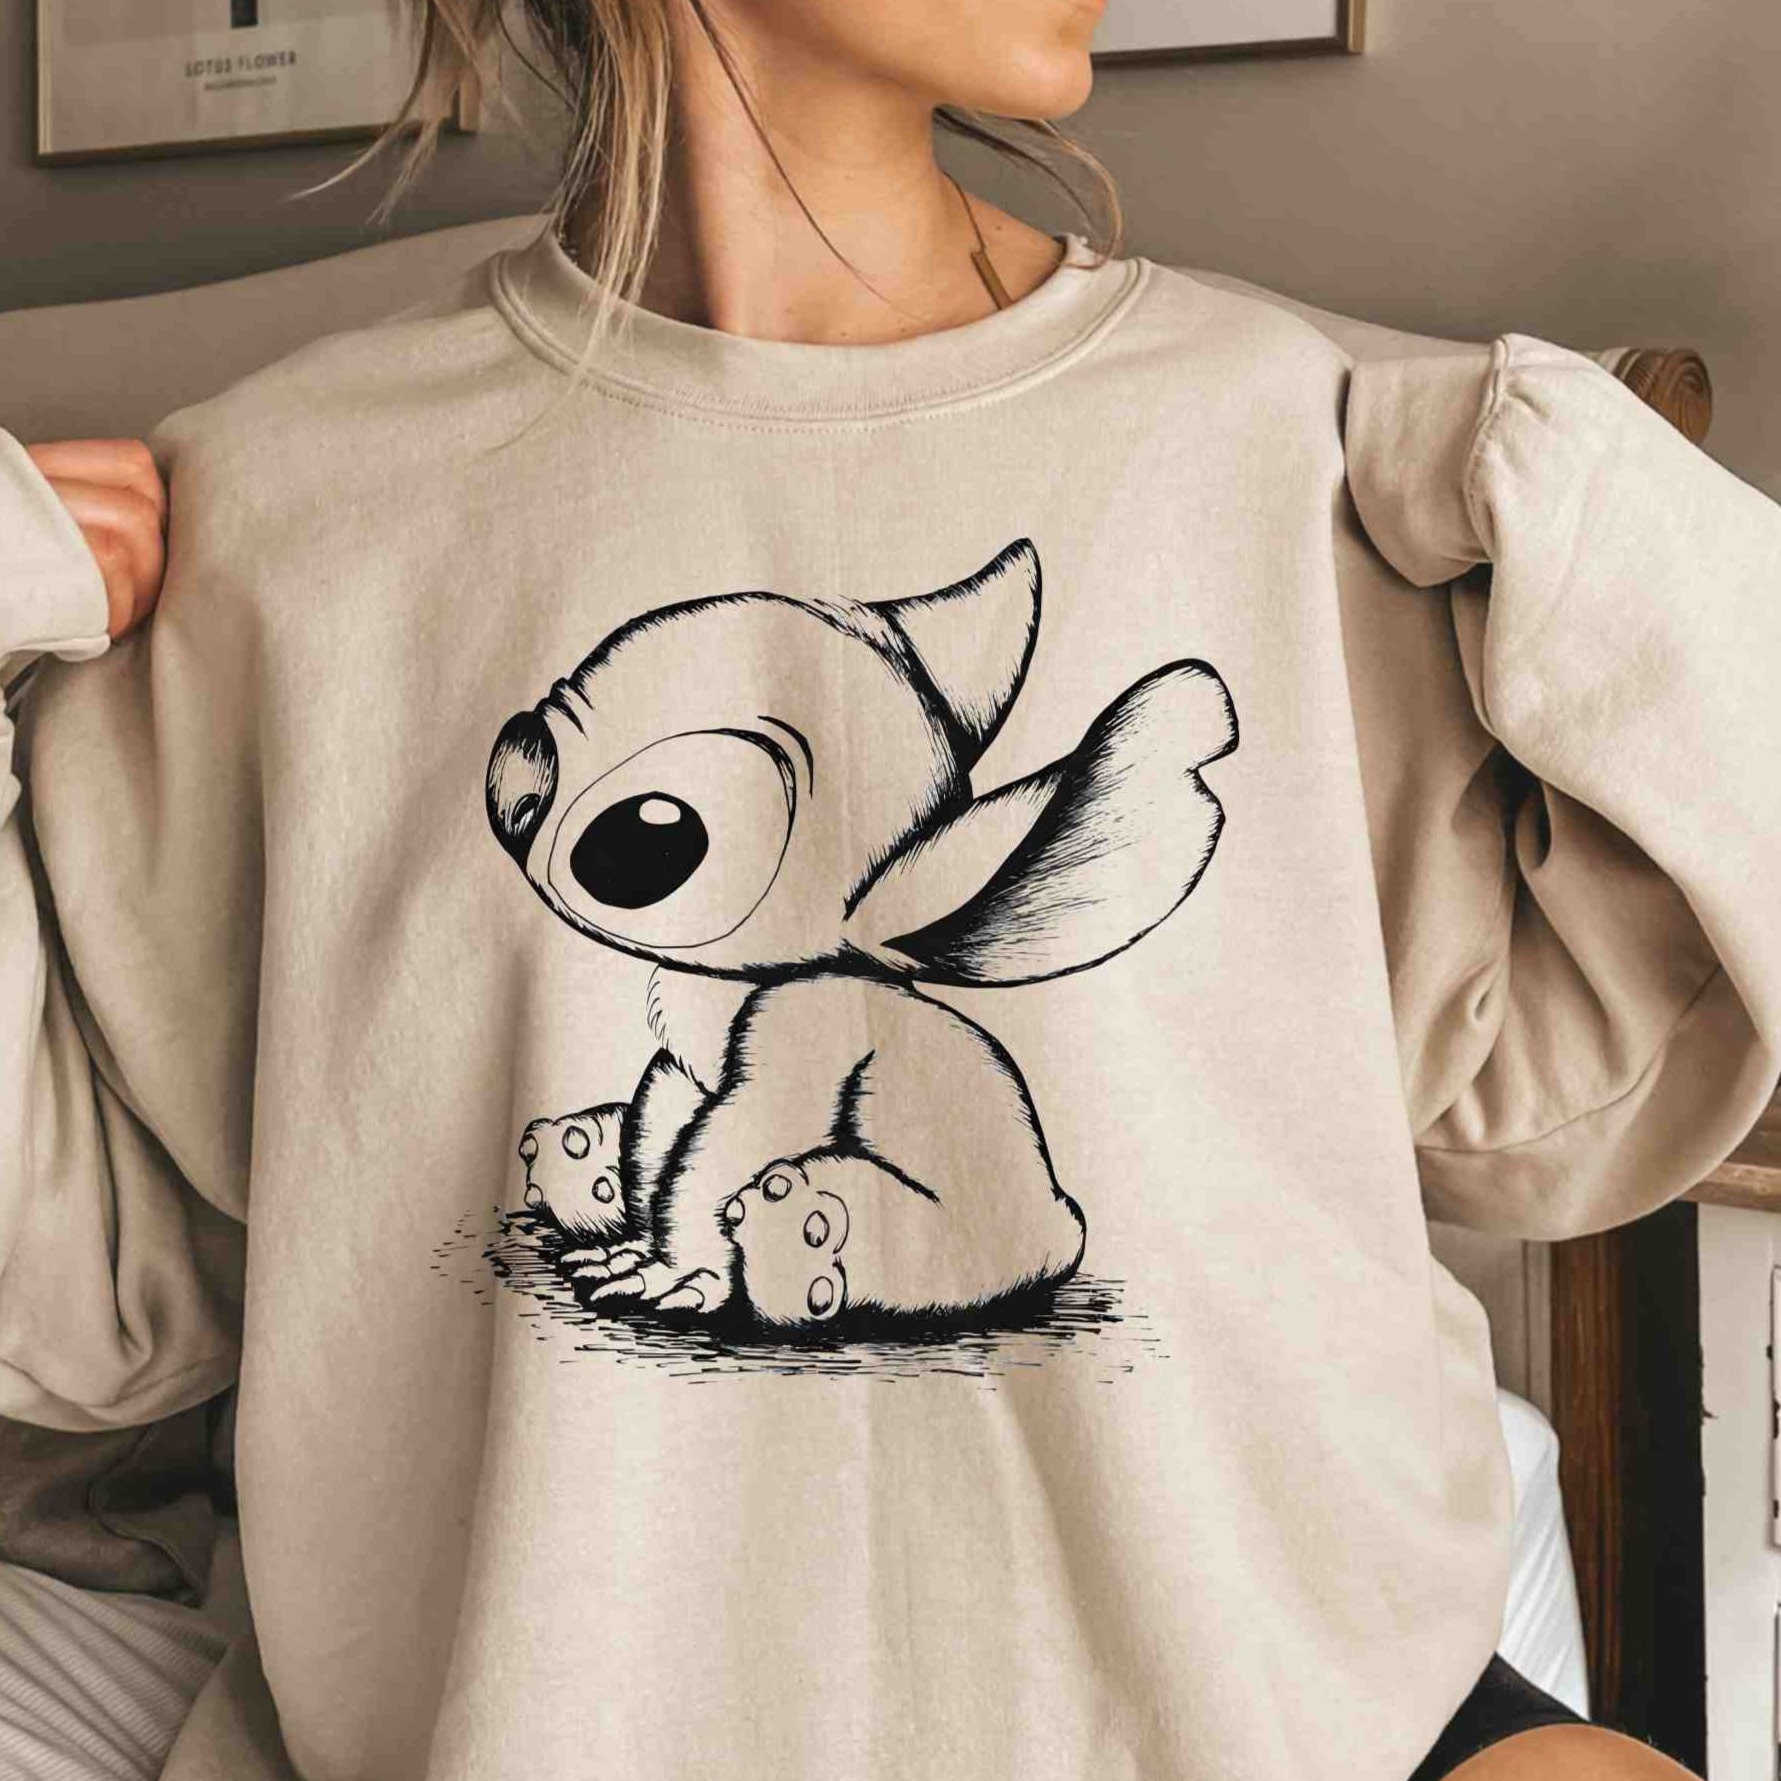 Stitch things i do in my spare time shirt, hoodie, sweater and long sleeve